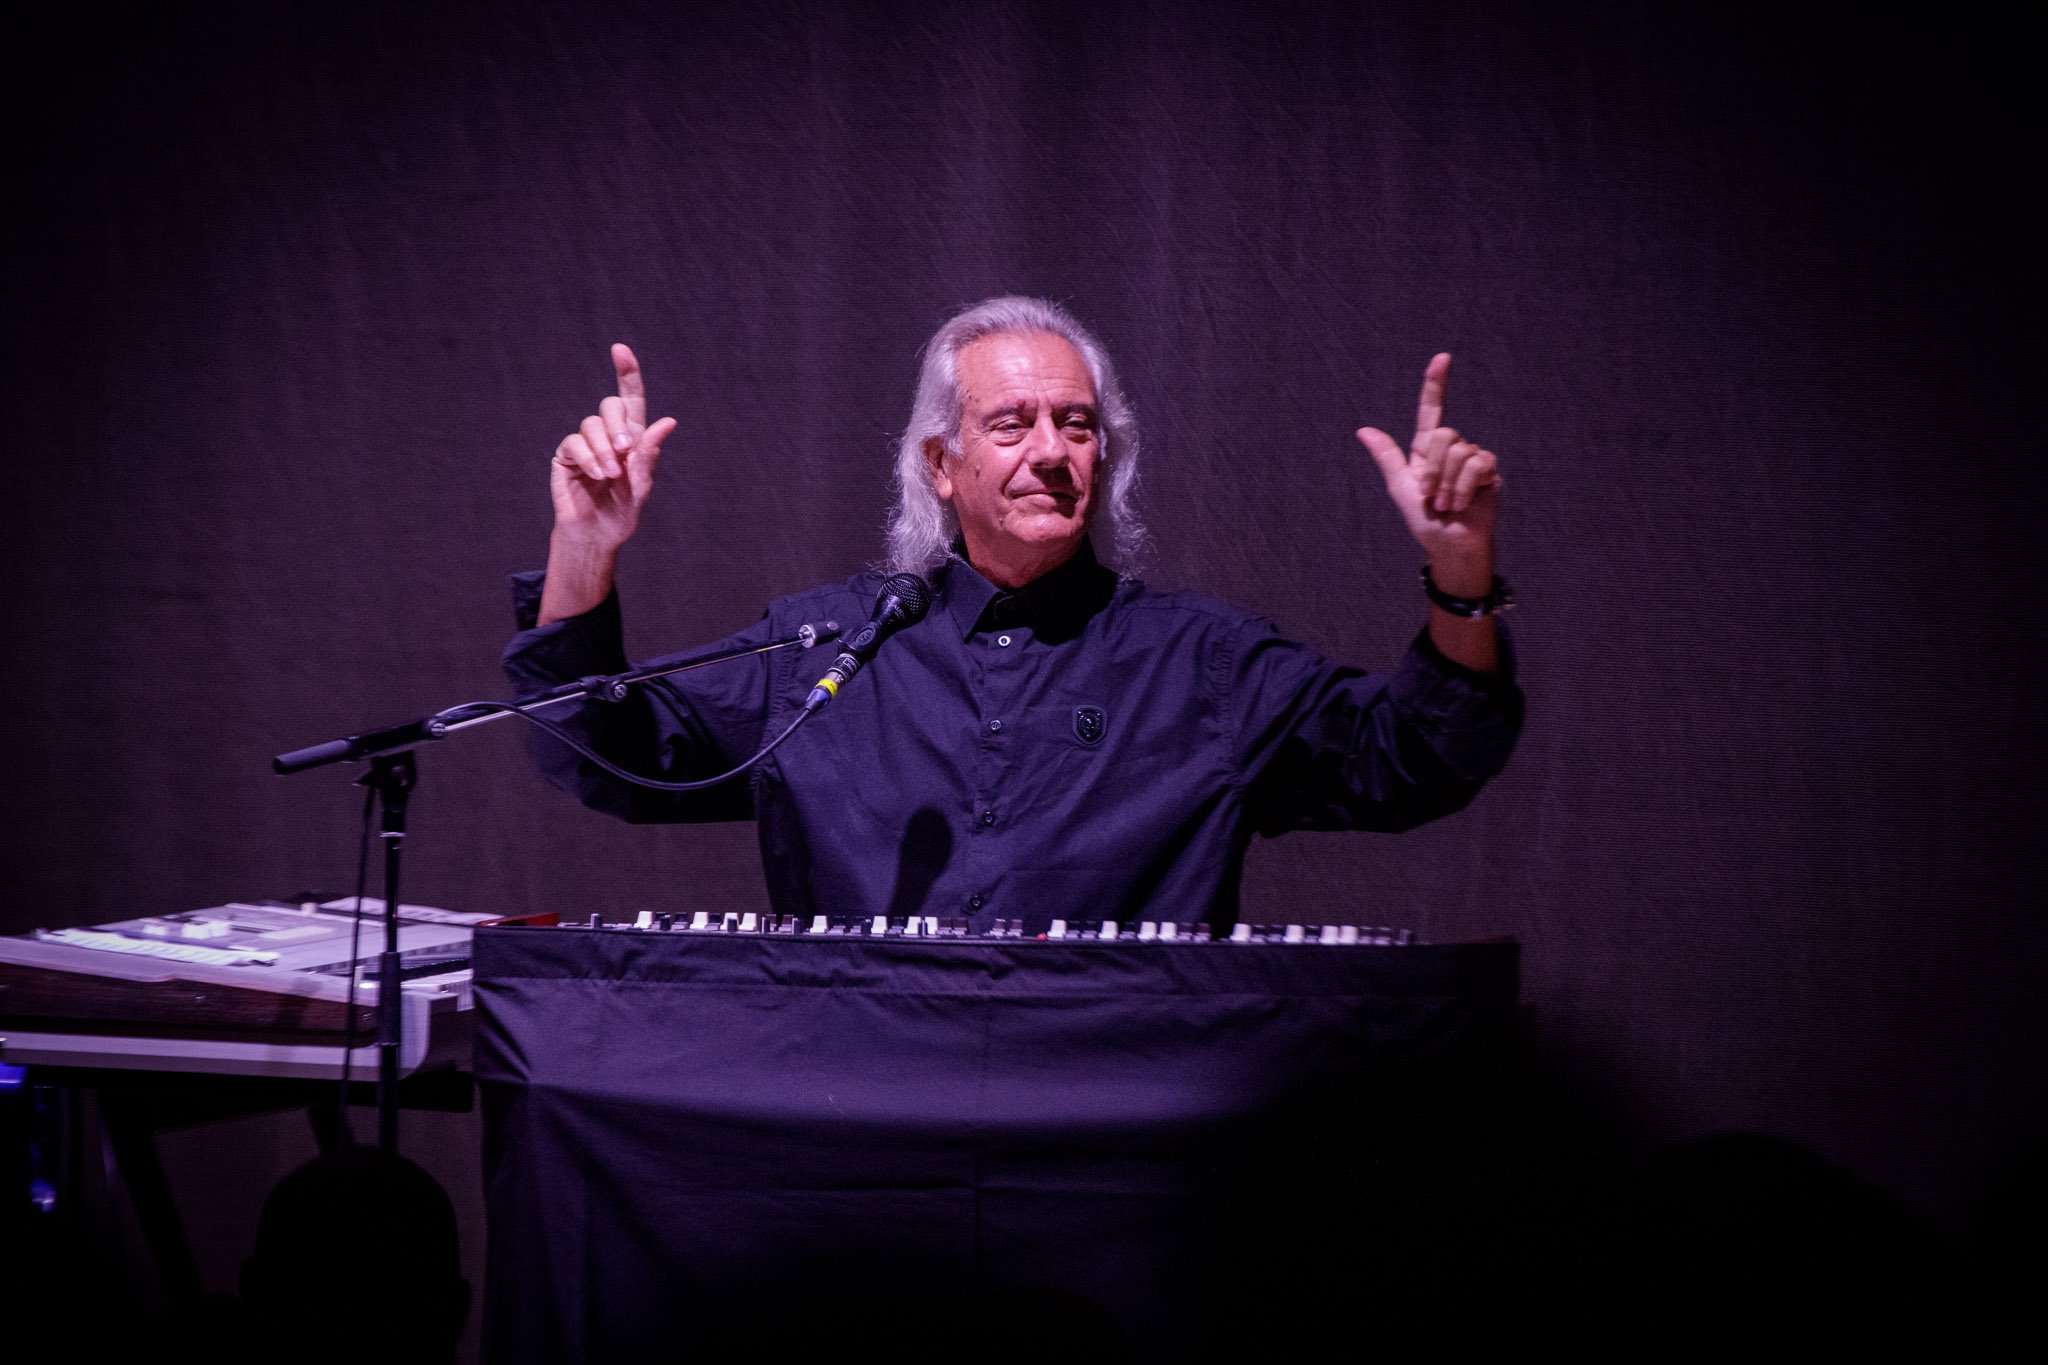 Uriah Heep at The Bridgewater Hall in Manchester on October 3rd 